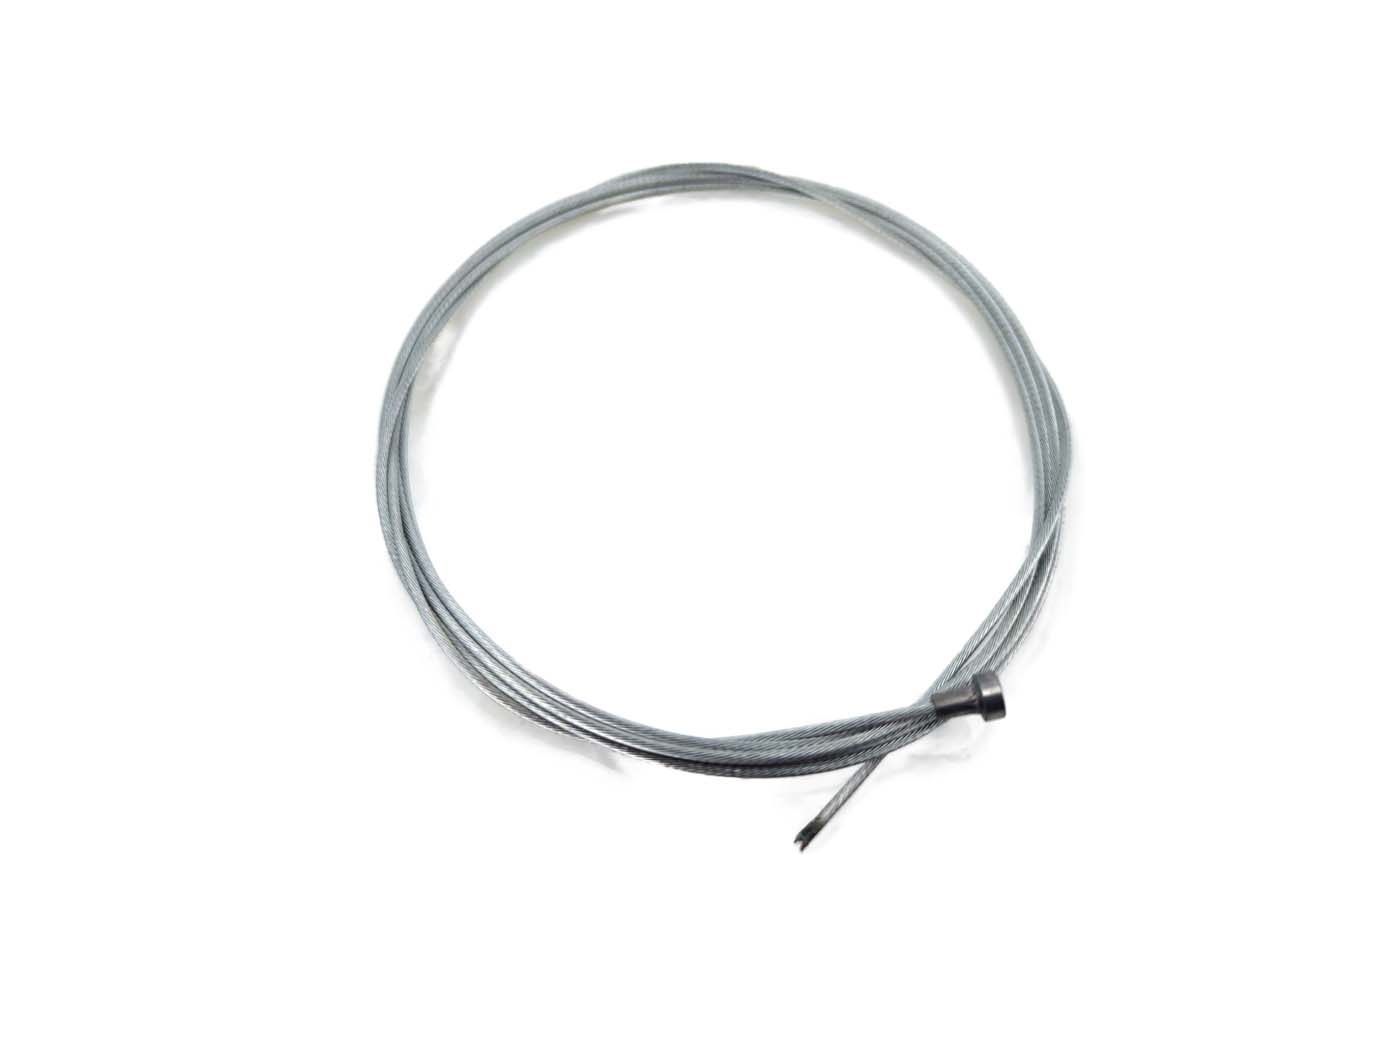 Clutch Cable Brake Cable 1.6 M Wire 1.5mm Nipple B 6x8 For Zündapp, Kreidler, Hercules, Puch, Simson